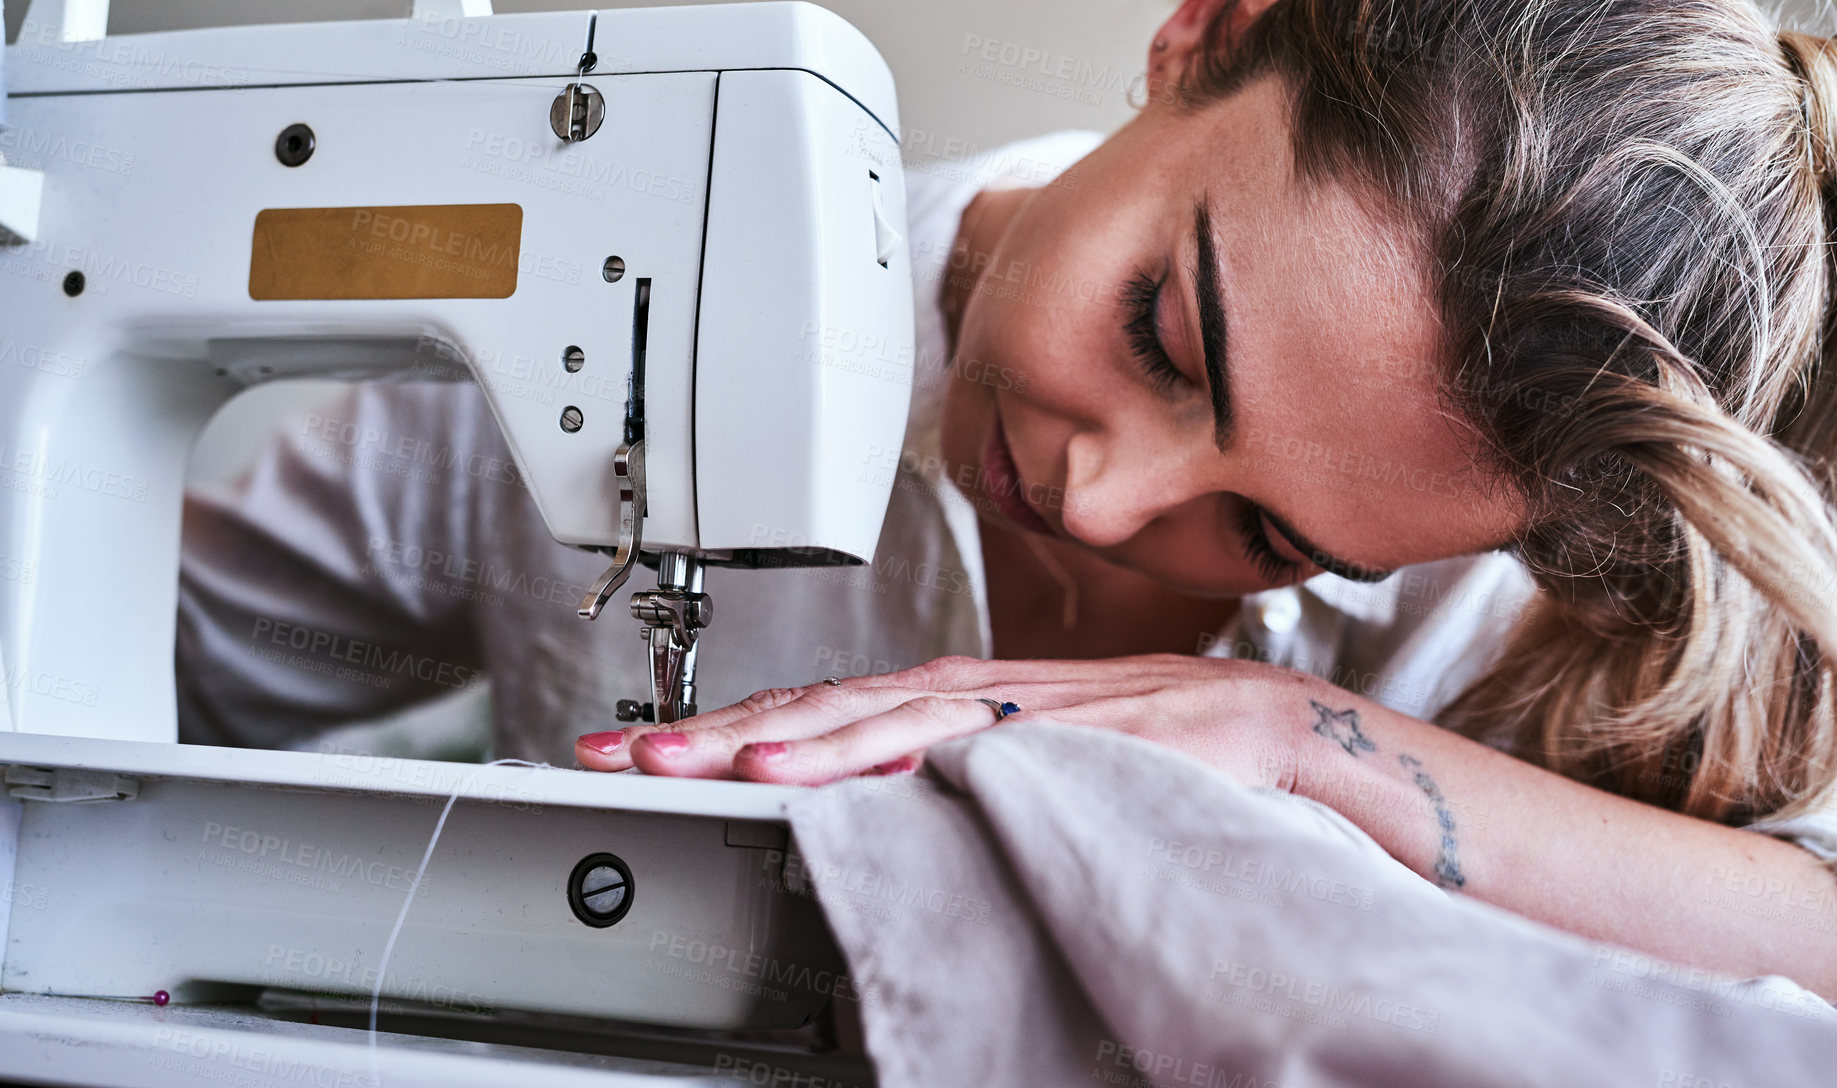 Buy stock photo Fashion, design and closeup of woman at sewing machine, small business ideas, creativity and focus in studio. Creative startup, textile designer or tailor stitching fabric, young entrepreneur at work